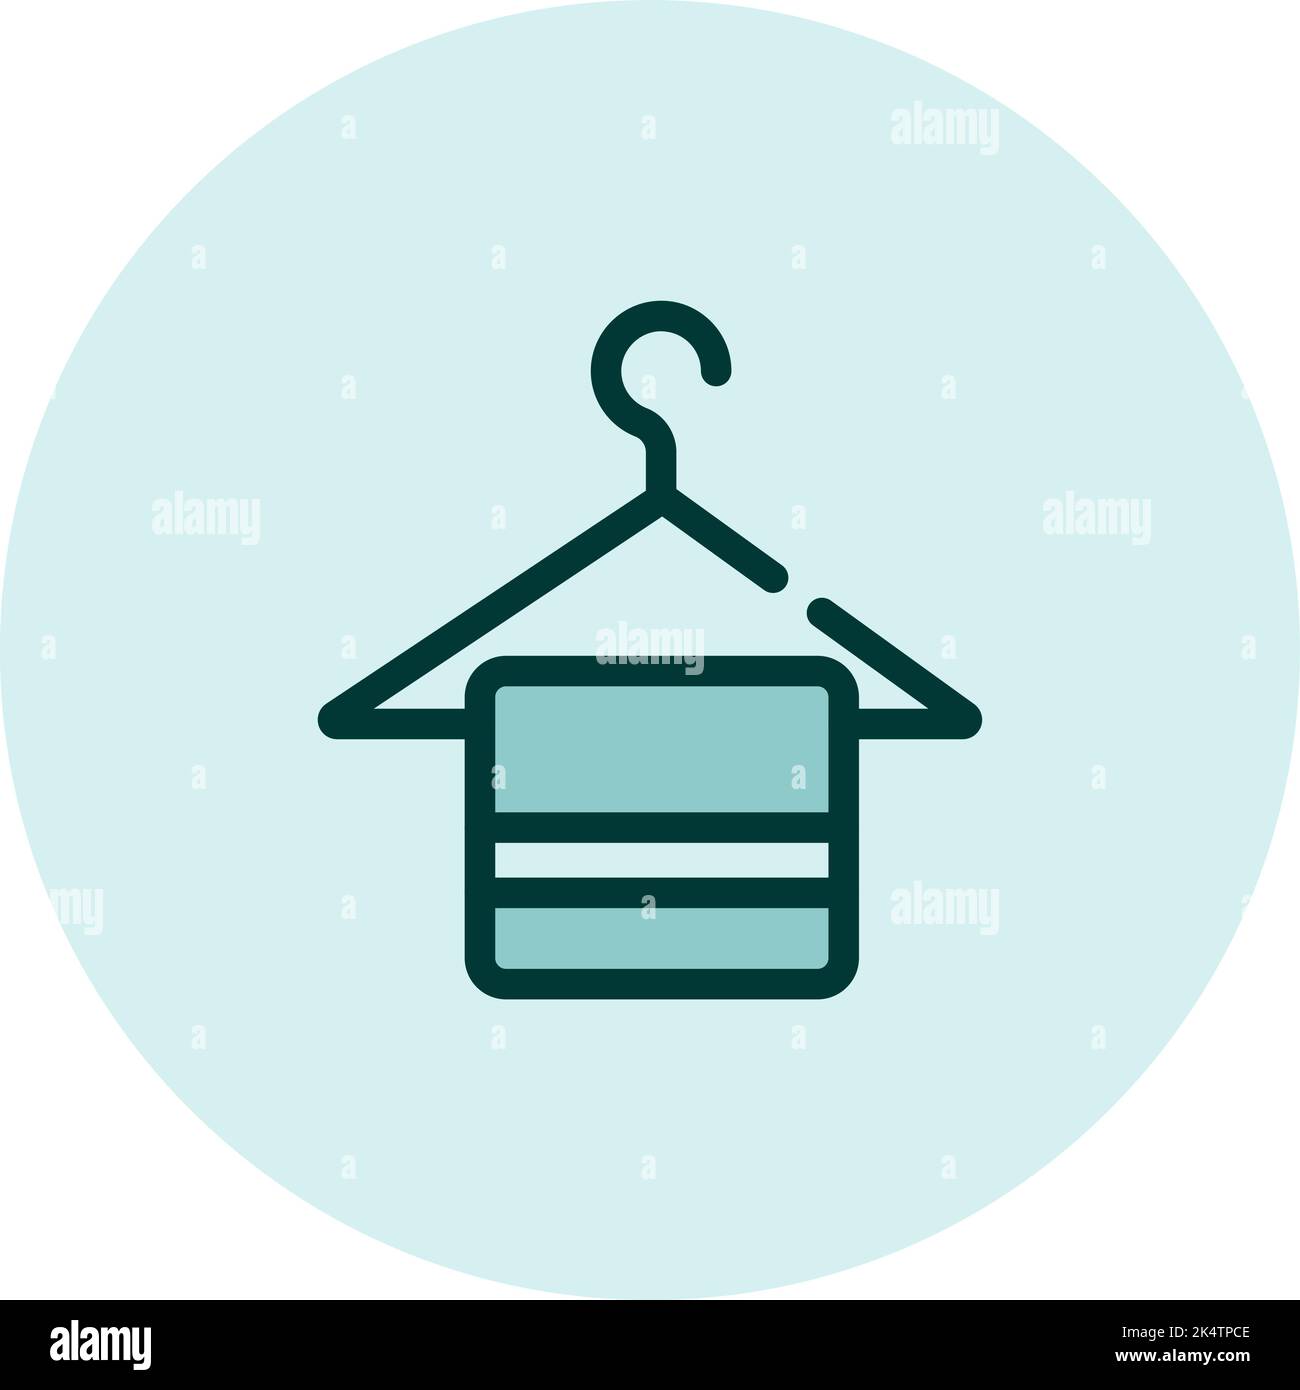 Cleaning hanger, illustration, vector on a white background. Stock Vector